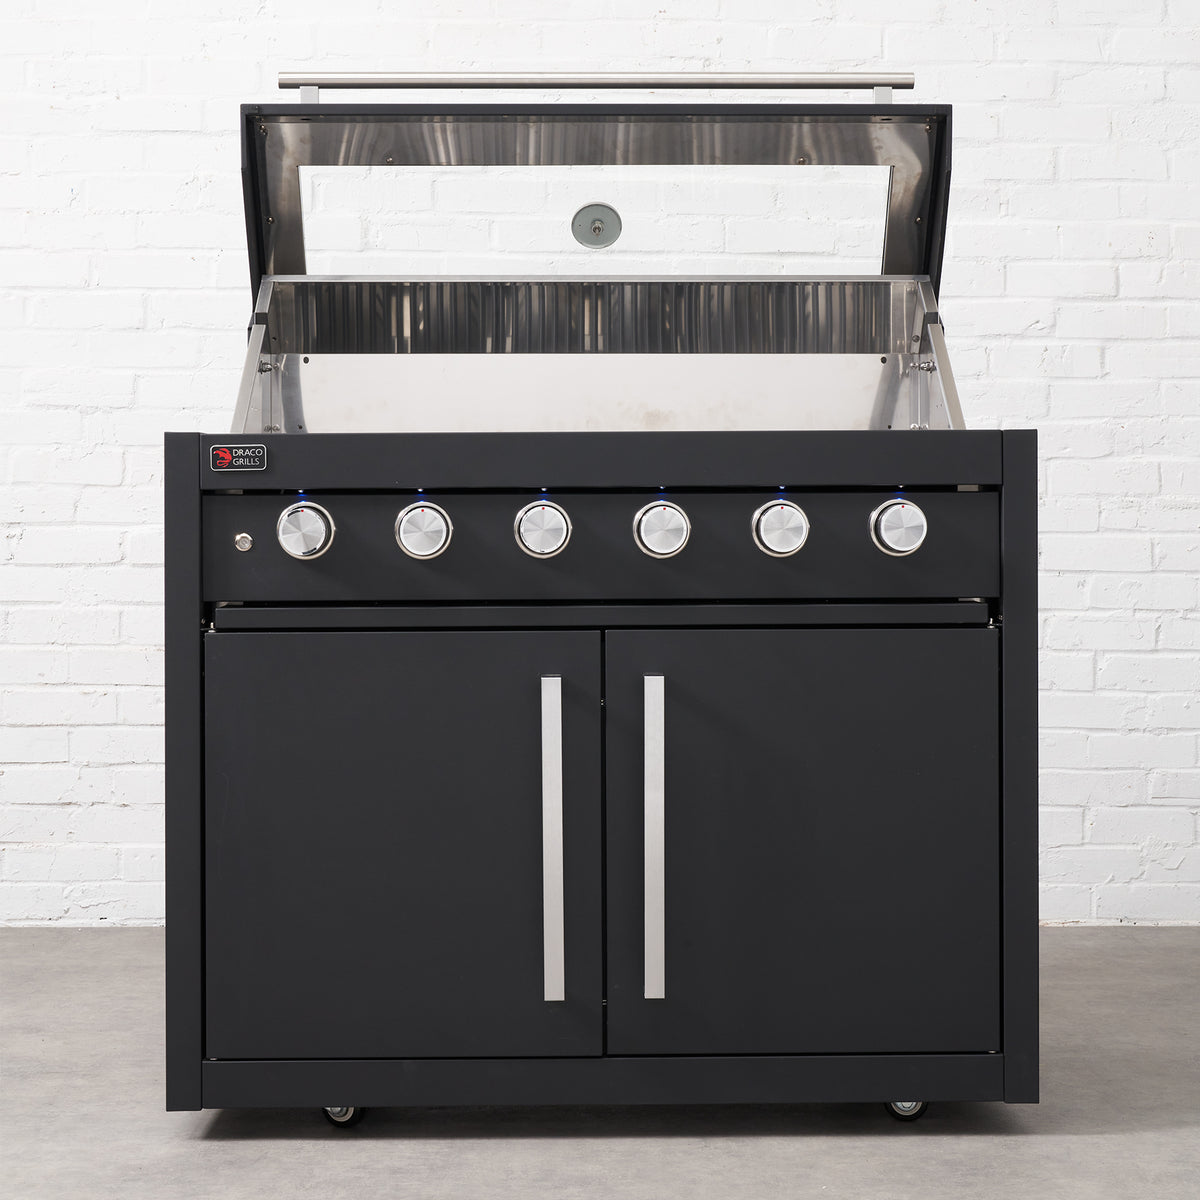 Draco Grills Fusion 6 Burner Black Outdoor Kitchen with Modular Side Burner and Sink